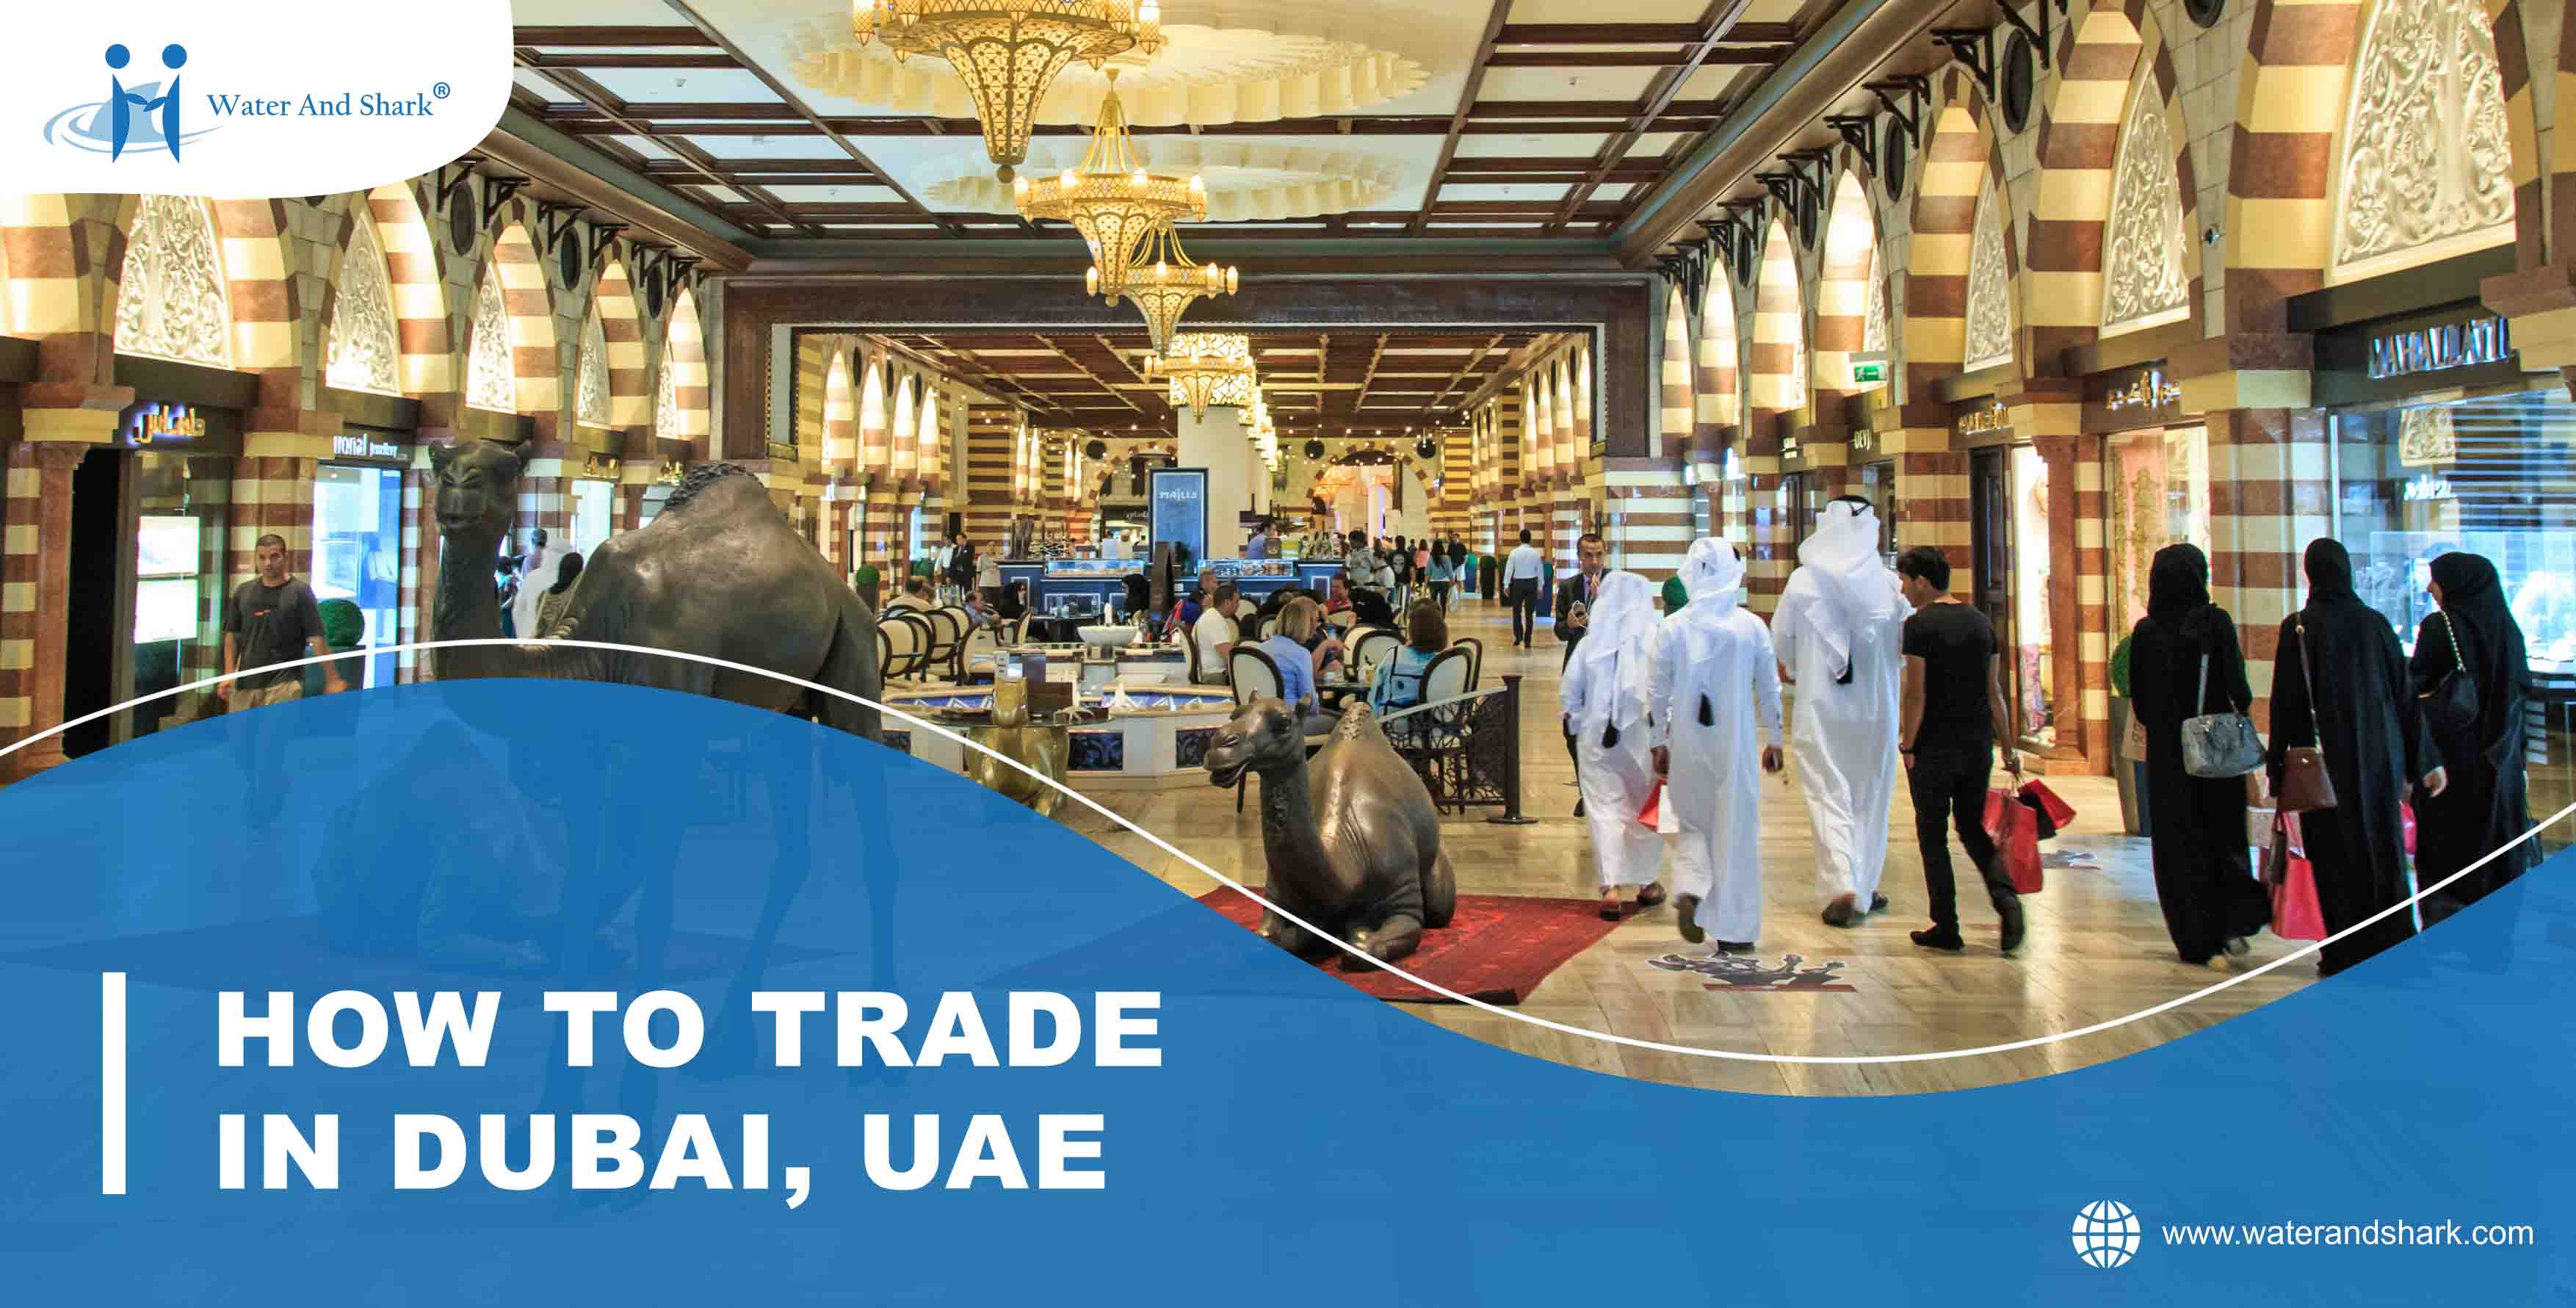 650x1280_HOW_TO_TRADE_IN_DUBAI,_UAE_low_size.jpg